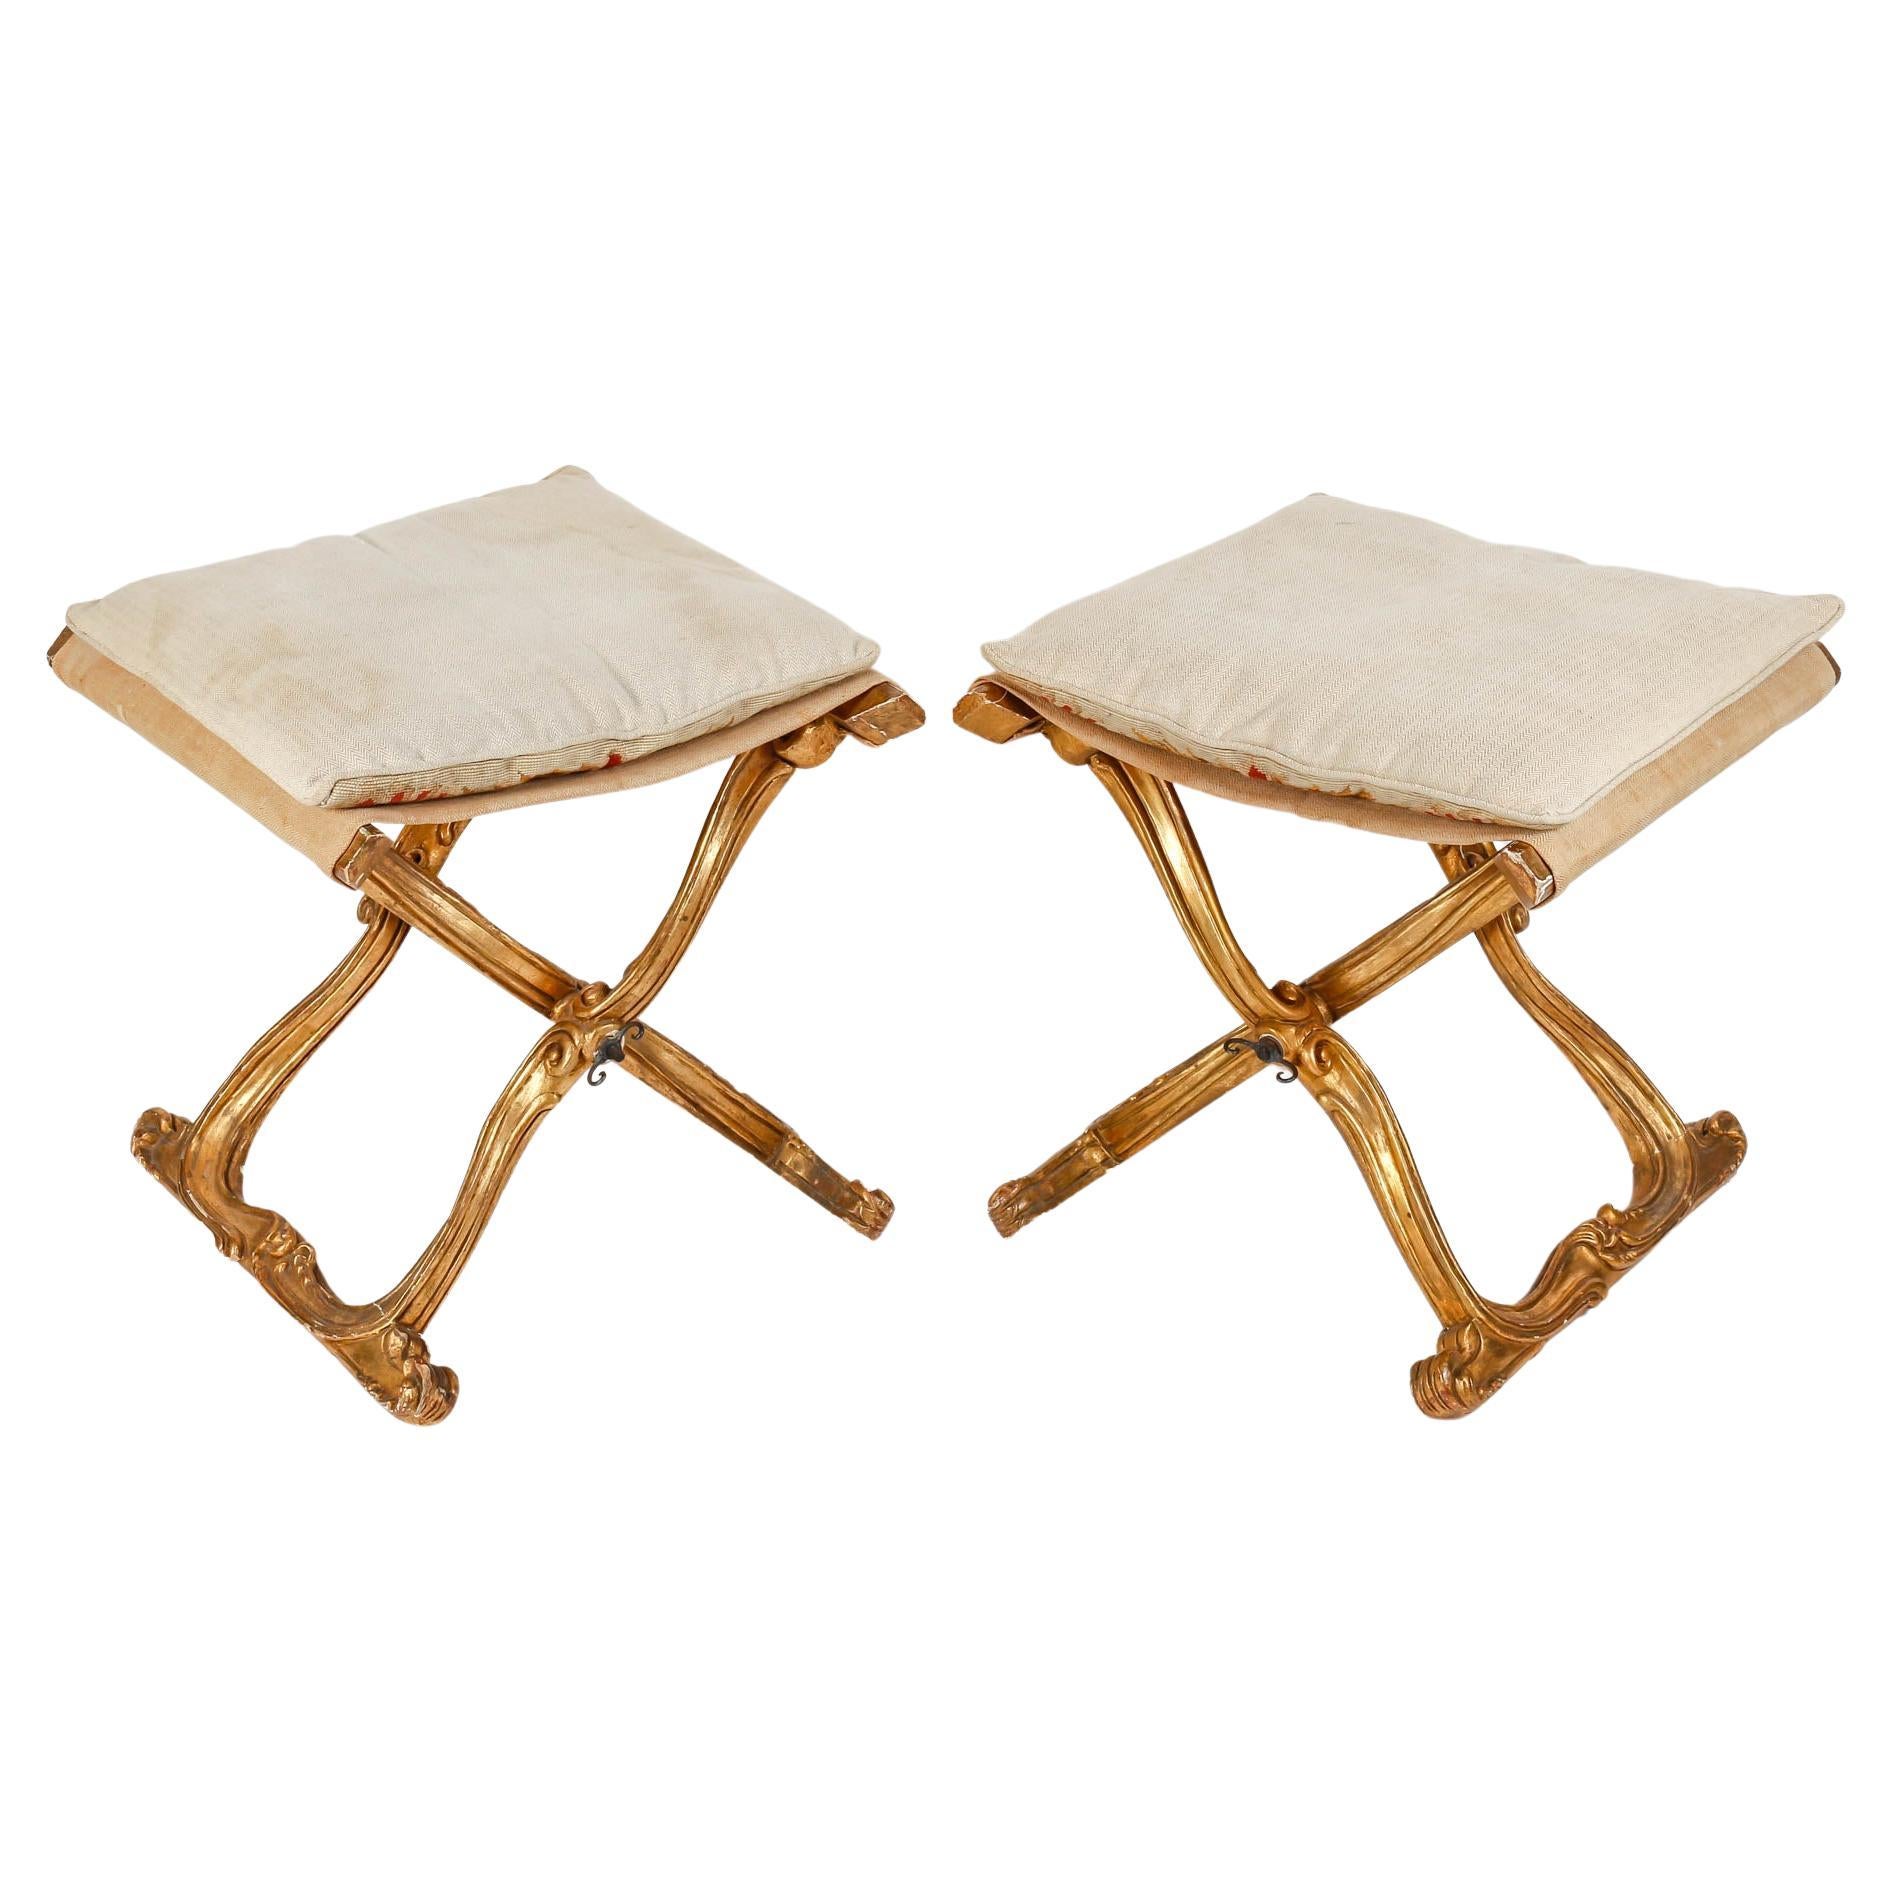 Pair of Louis XV Style X-Shaped Stools, 19th Century.